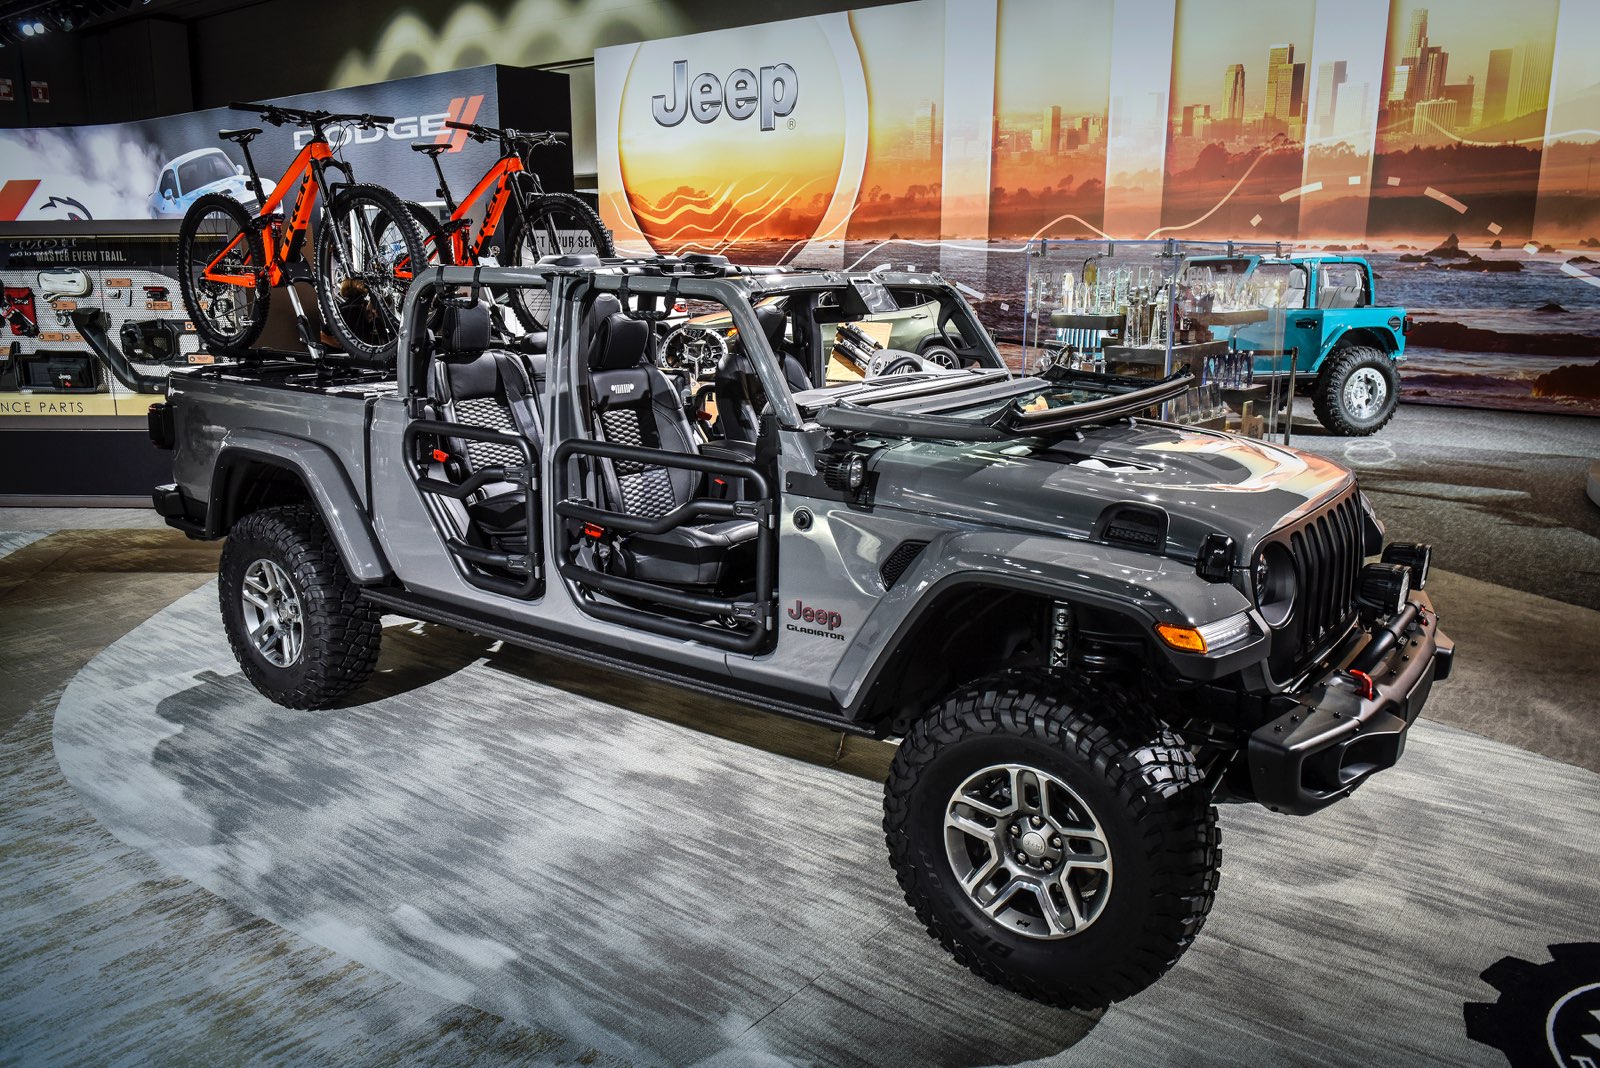 Here Are All the Mopar Accessories Ready for the 2020 Jeep Gladiator.